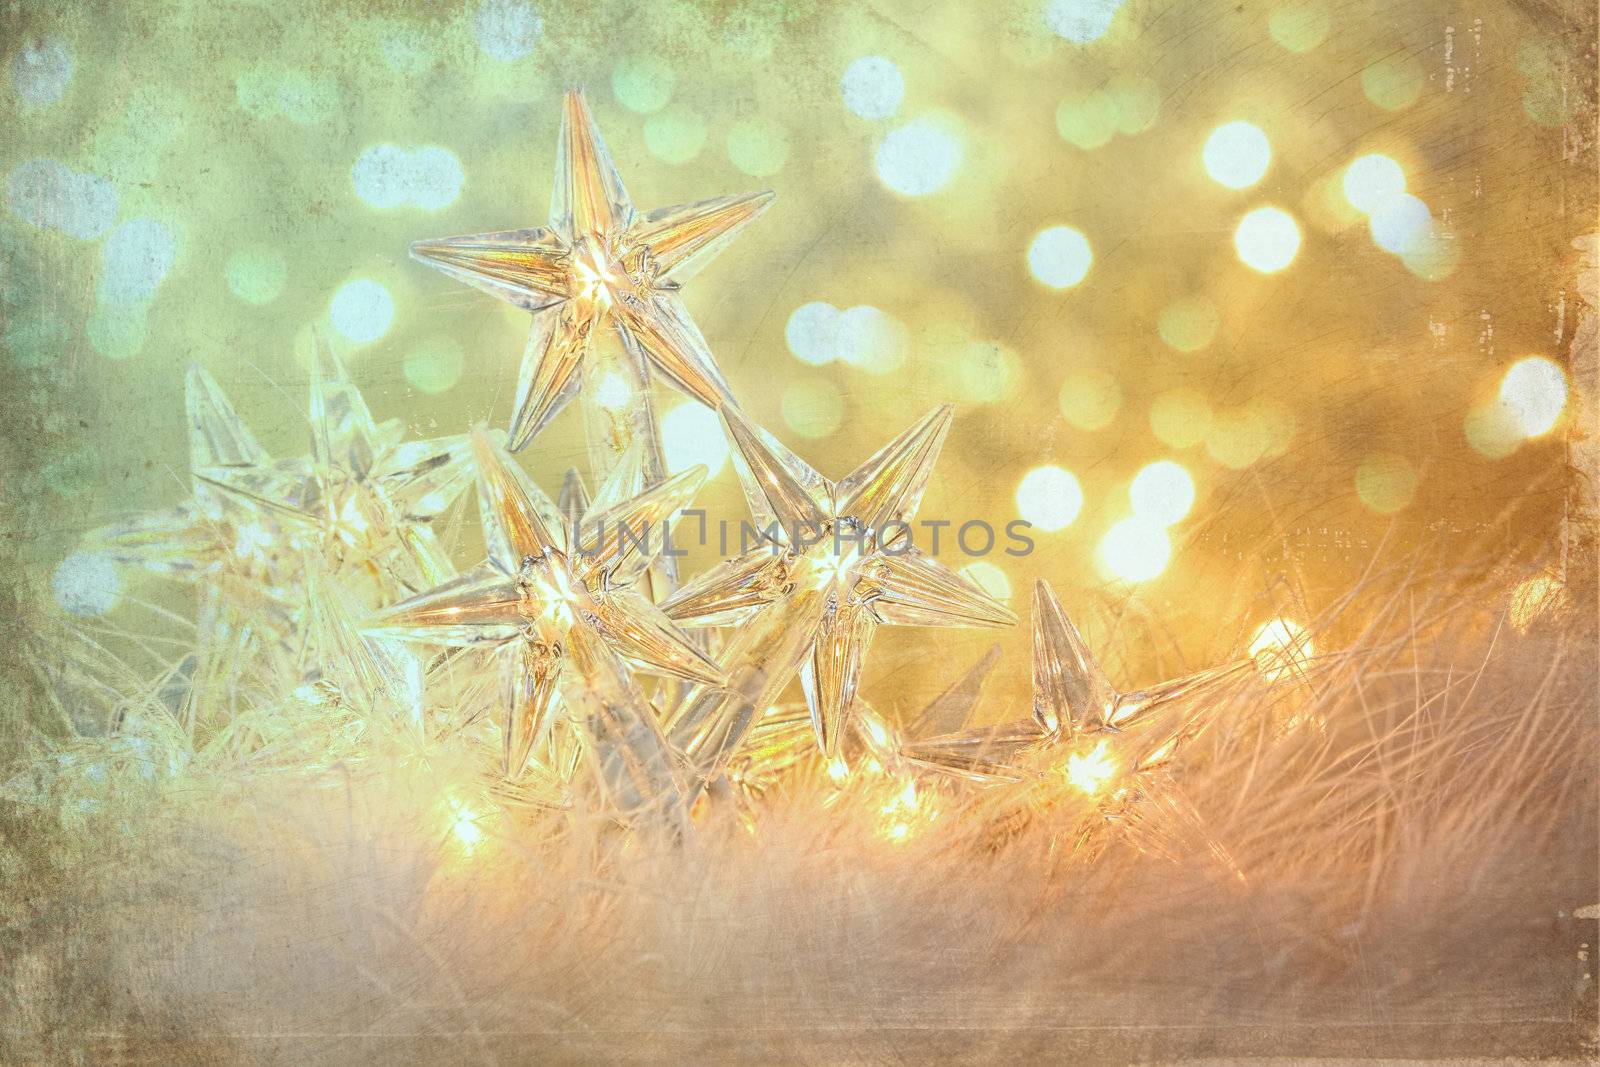 Star holiday lights with sparkle background by Sandralise